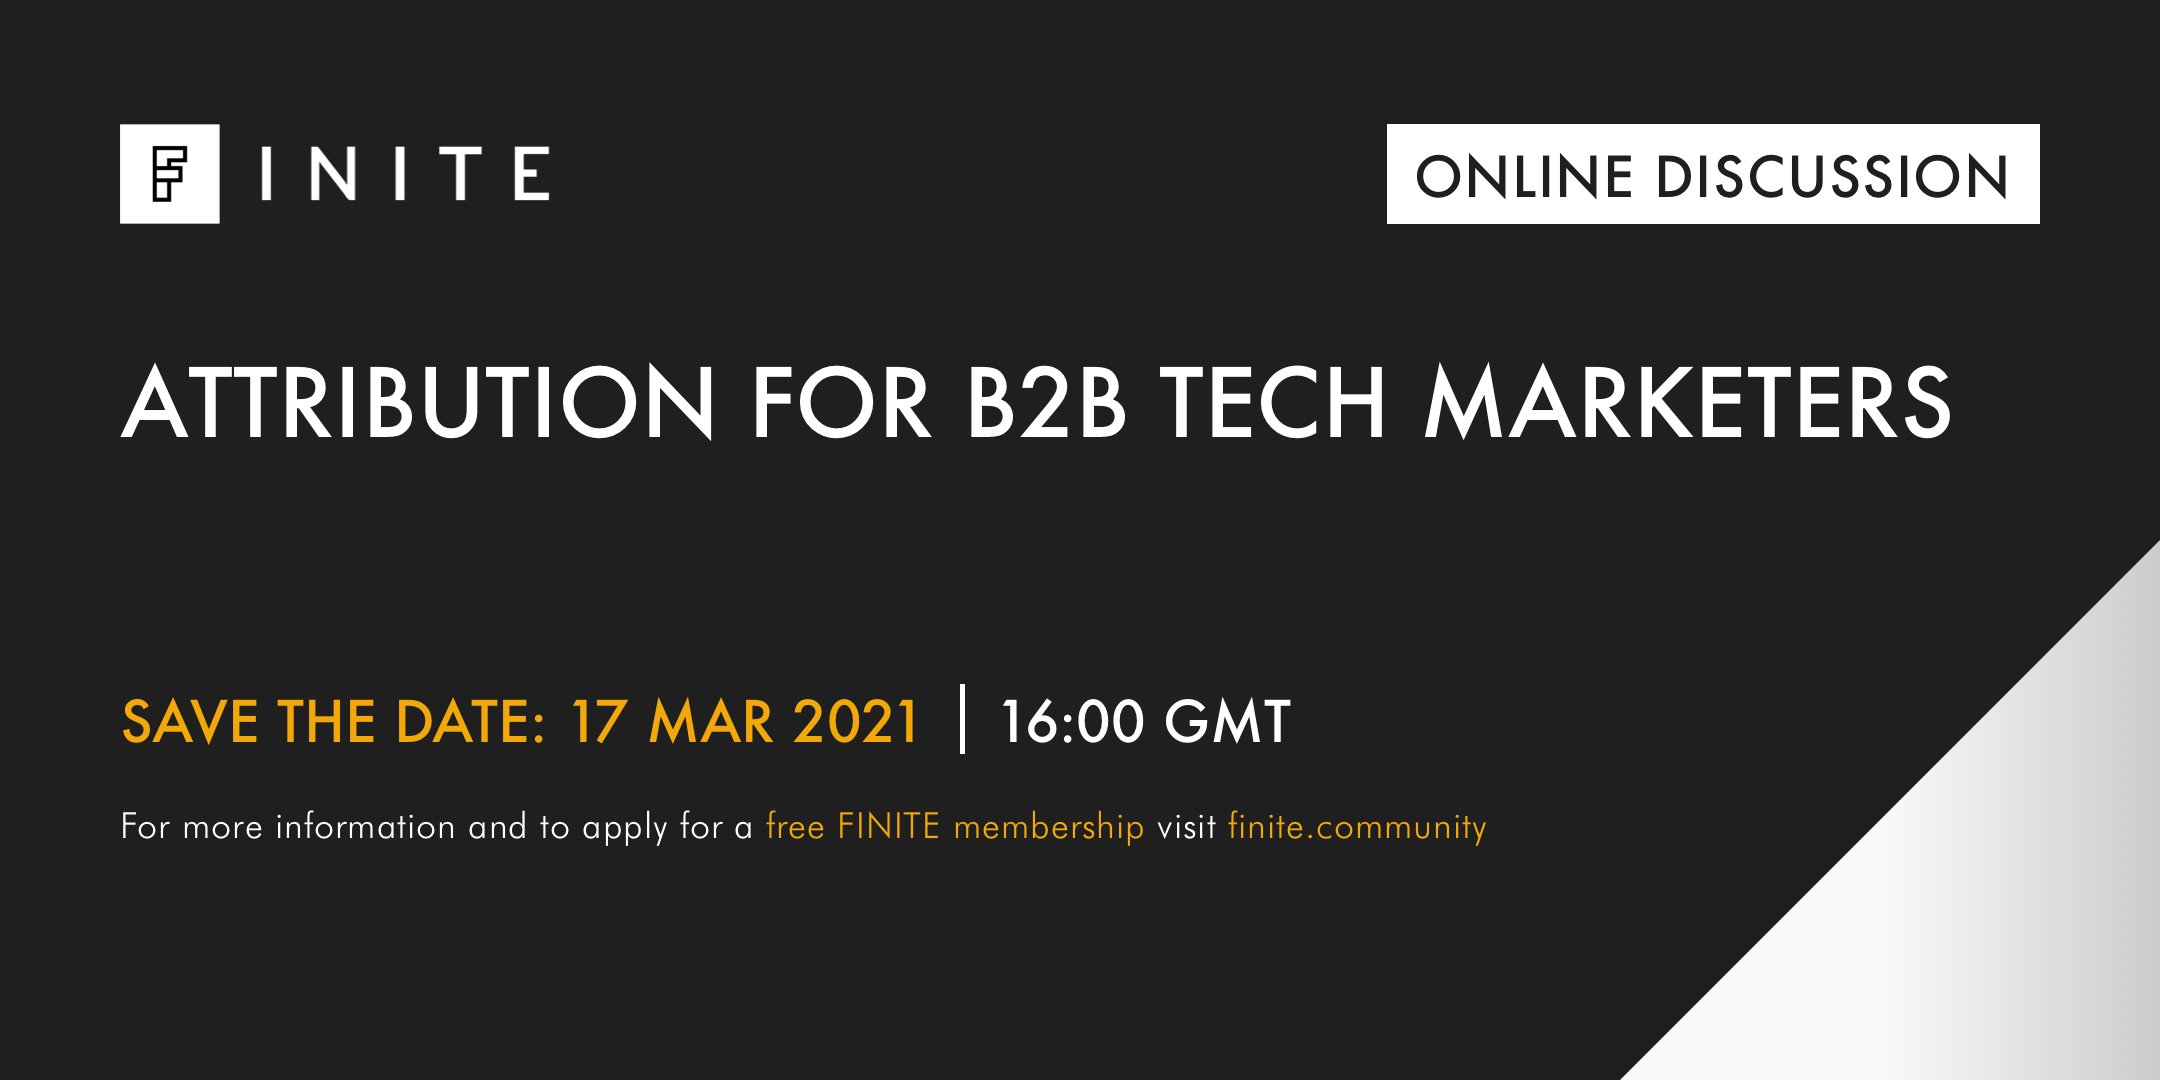 Online discussion: Attribution for B2B tech marketers